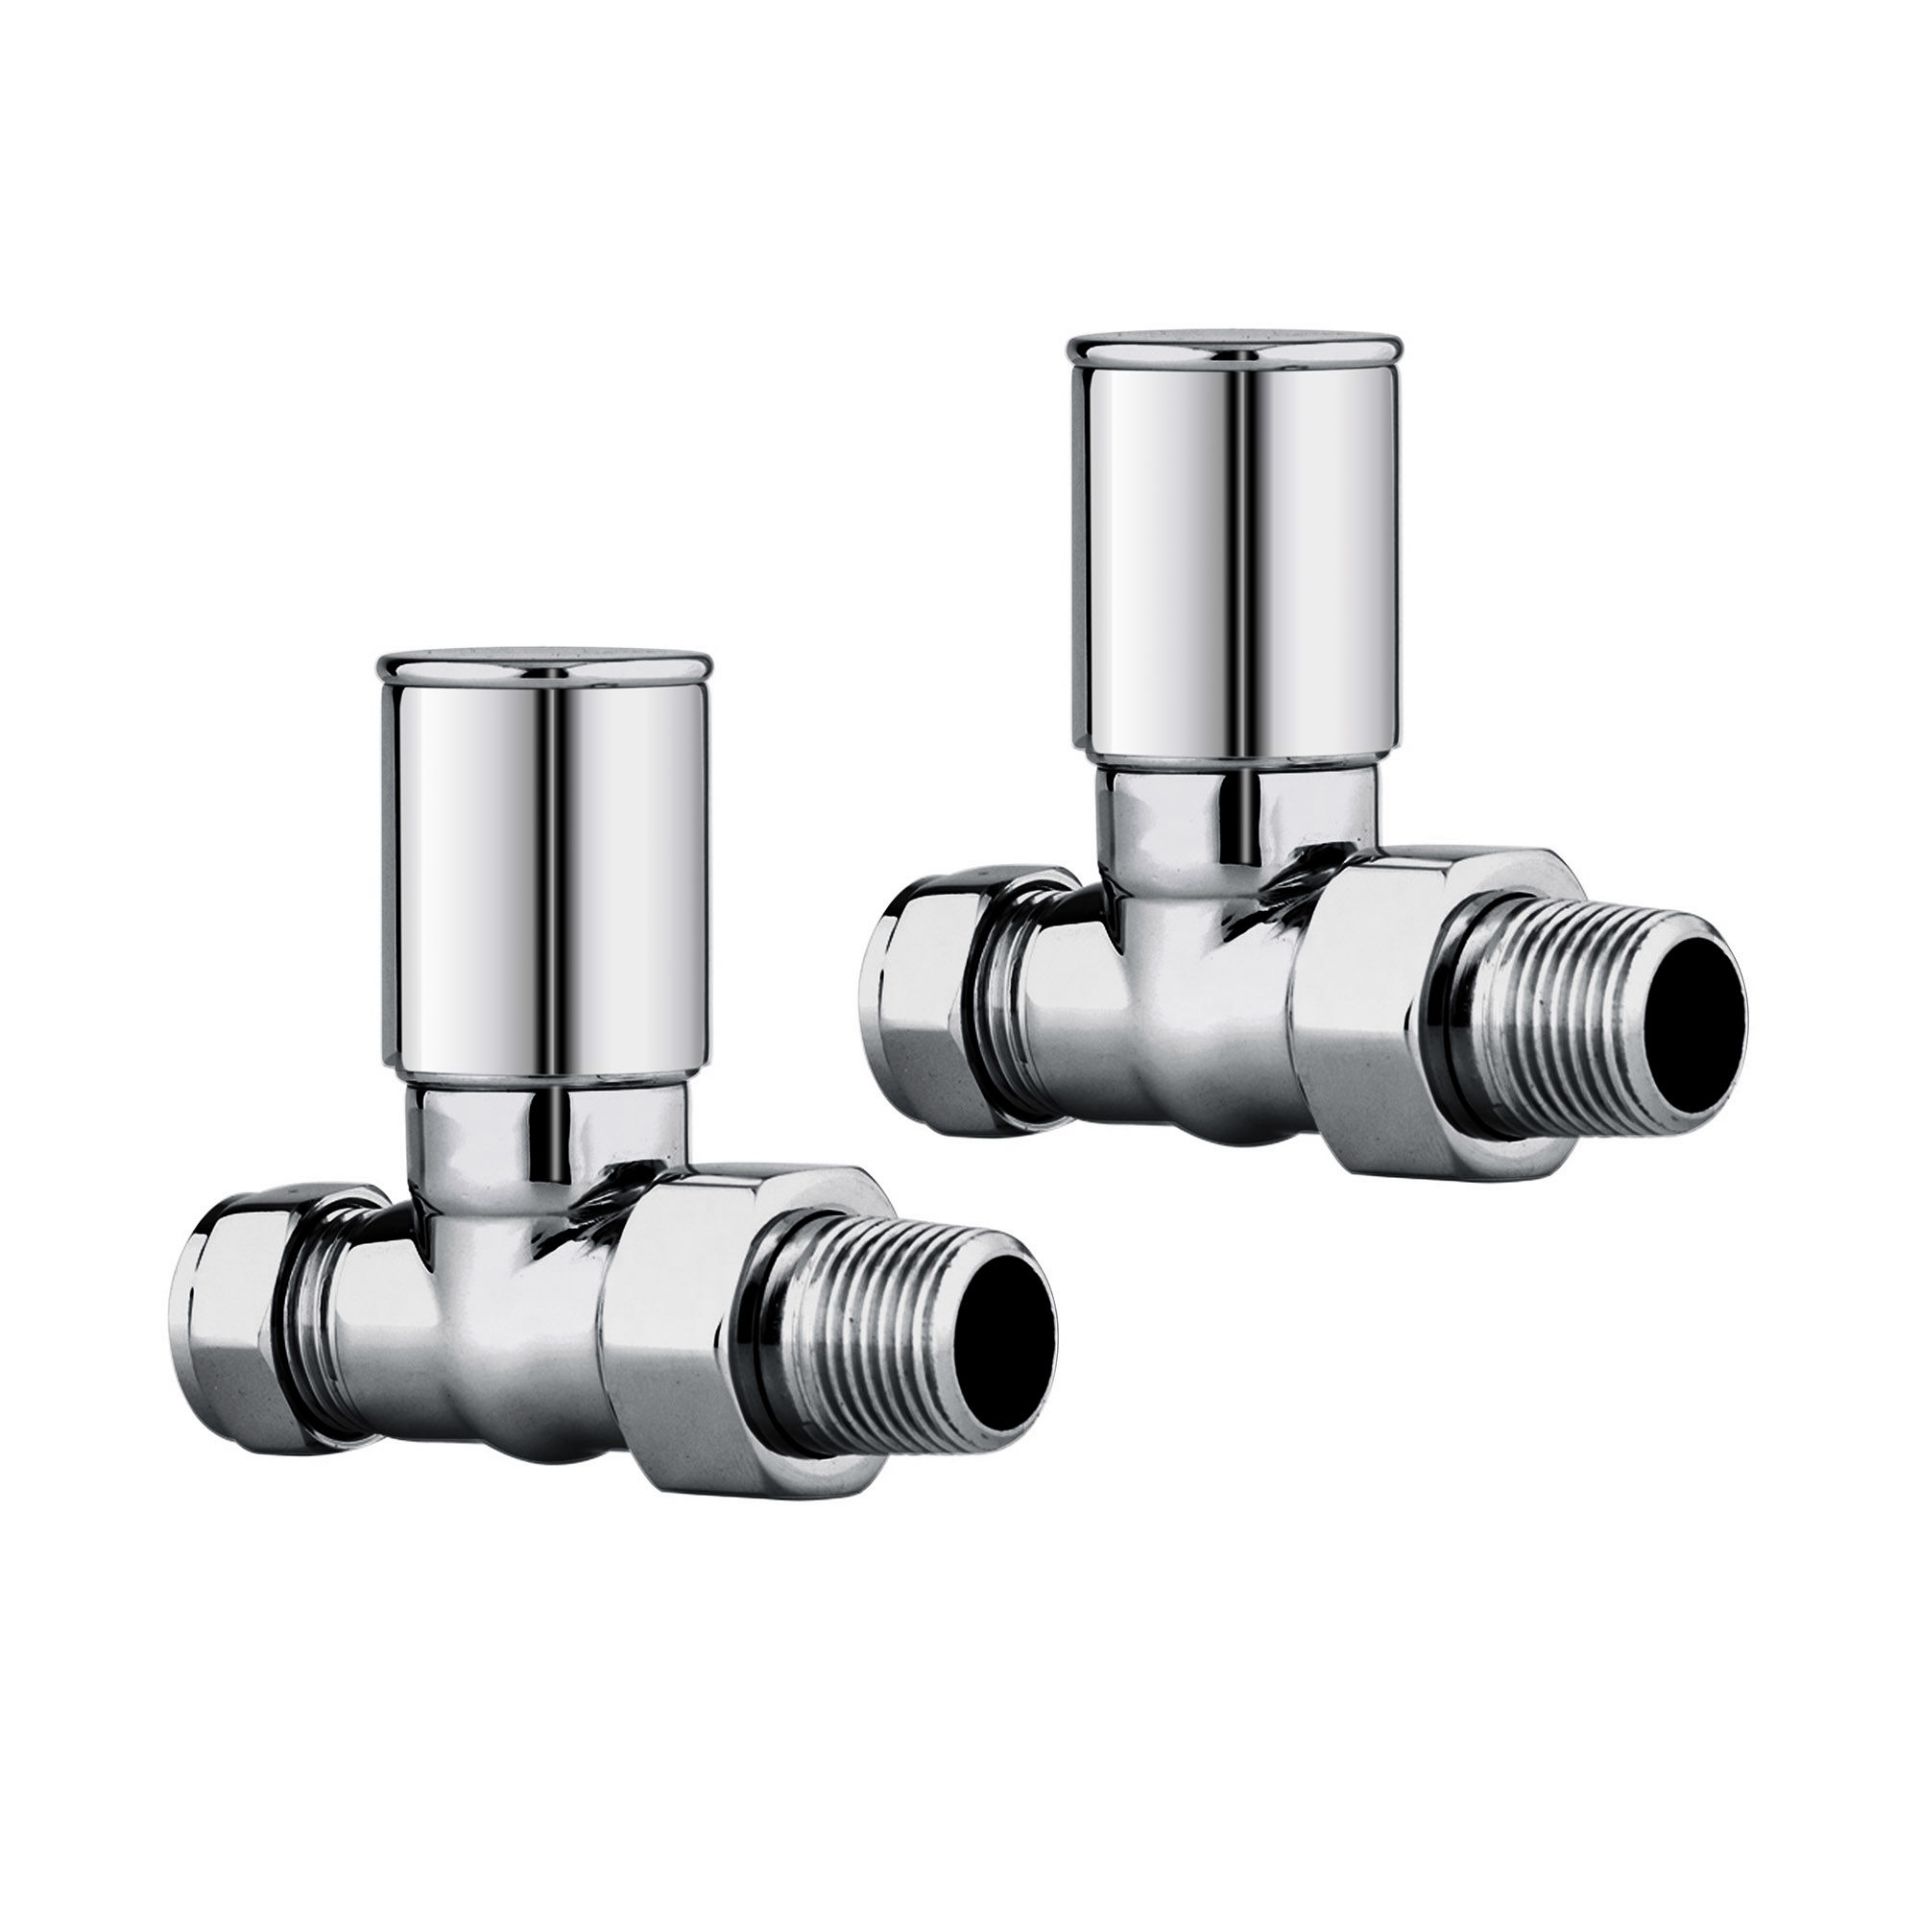 (QT1014) 15mm Standard Connection Straight Radiator Valves - Heavy Duty Polished Chrome Plated ... - Image 4 of 4